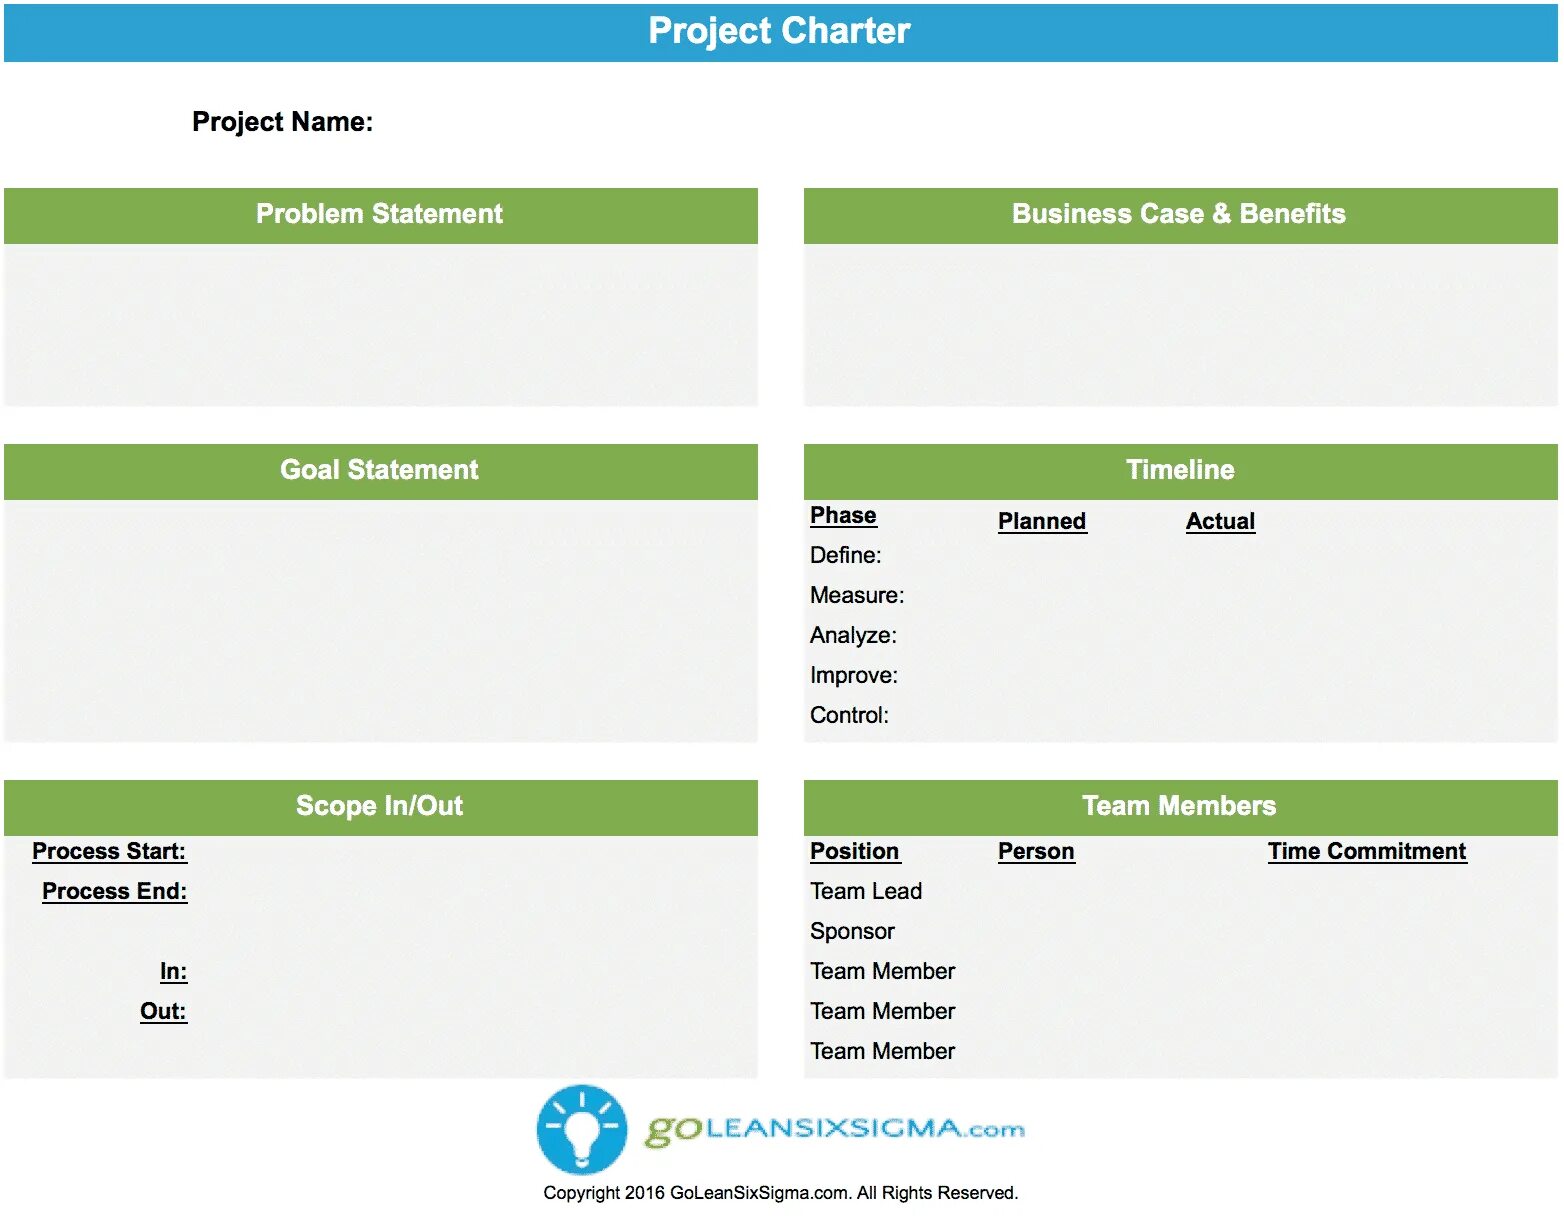 Project Charter. Project Charter Template. Project Charter example. Project Charter пример. Samples program